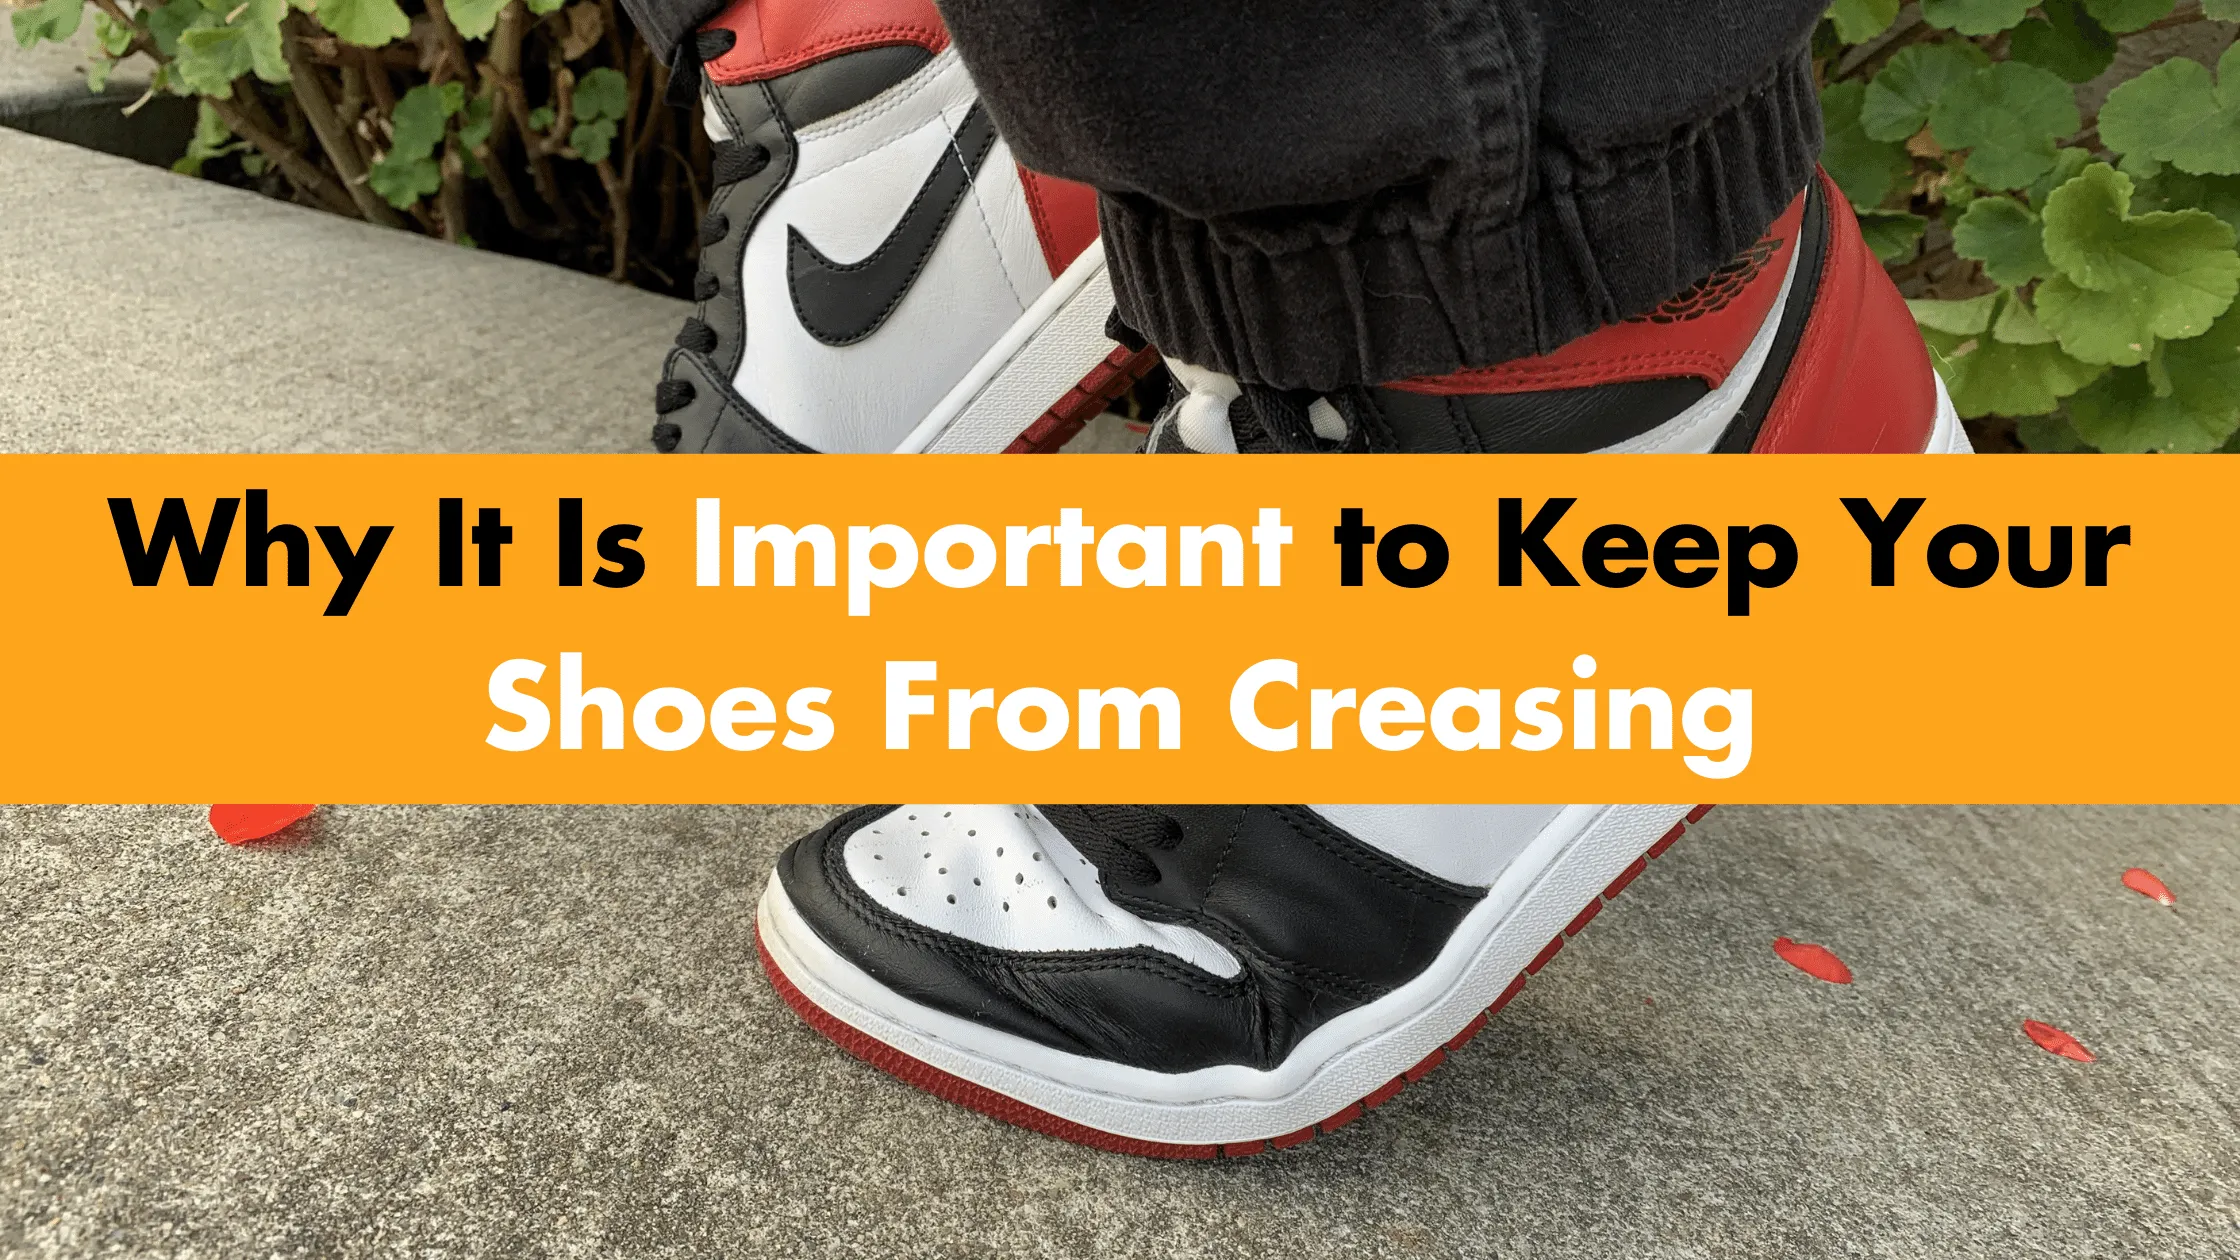 Why It Is Important to Keep Your Shoes From Creasing